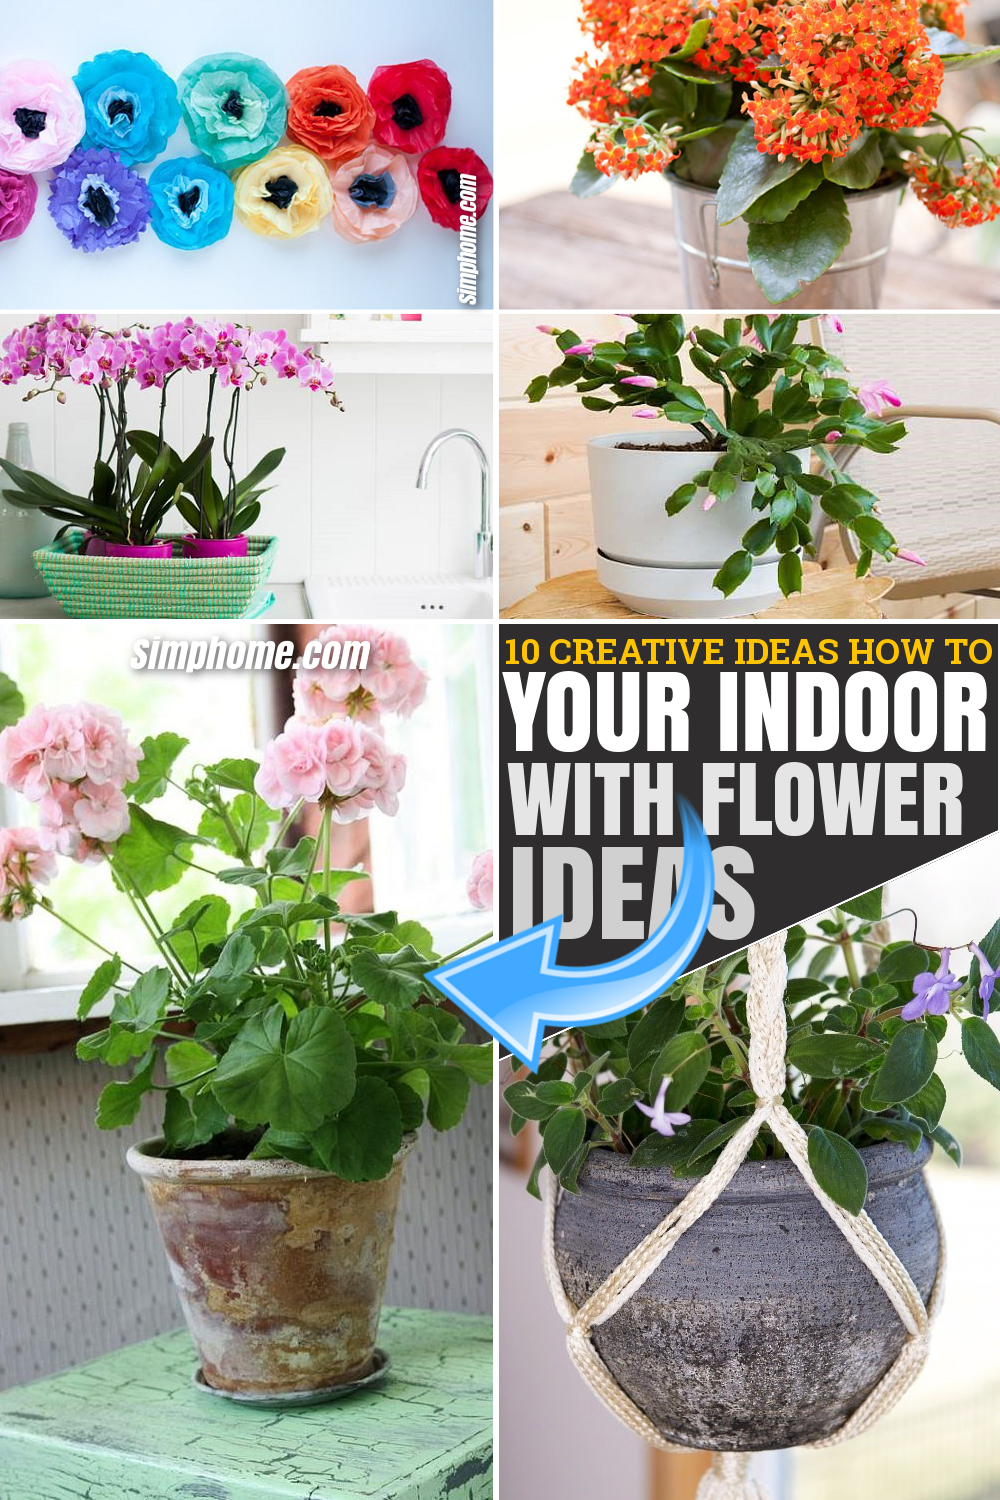 10 Creative Ideas How to Improve Your Indoor with Flowers via SIMPHOME.COM Featured Pinterest Image